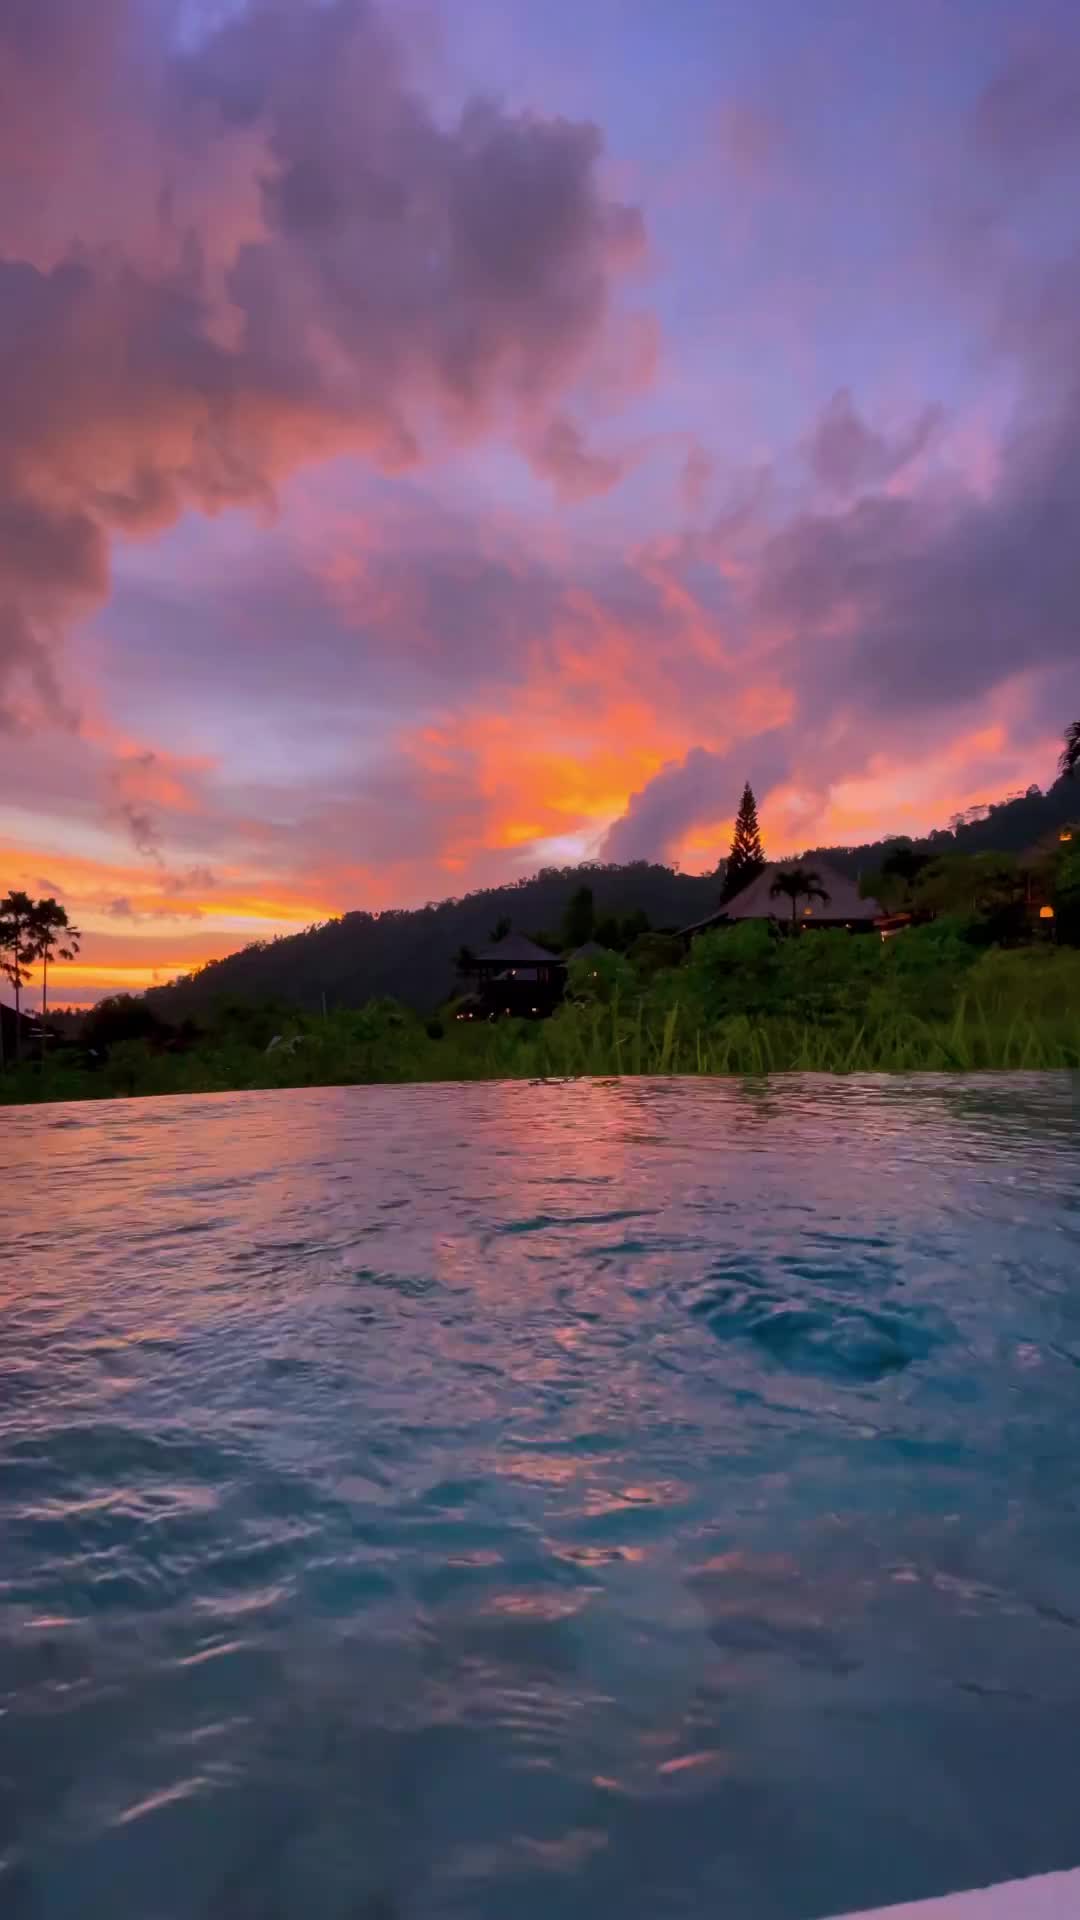 Sunsets & Soulmates in Bali - A Dream Vacation